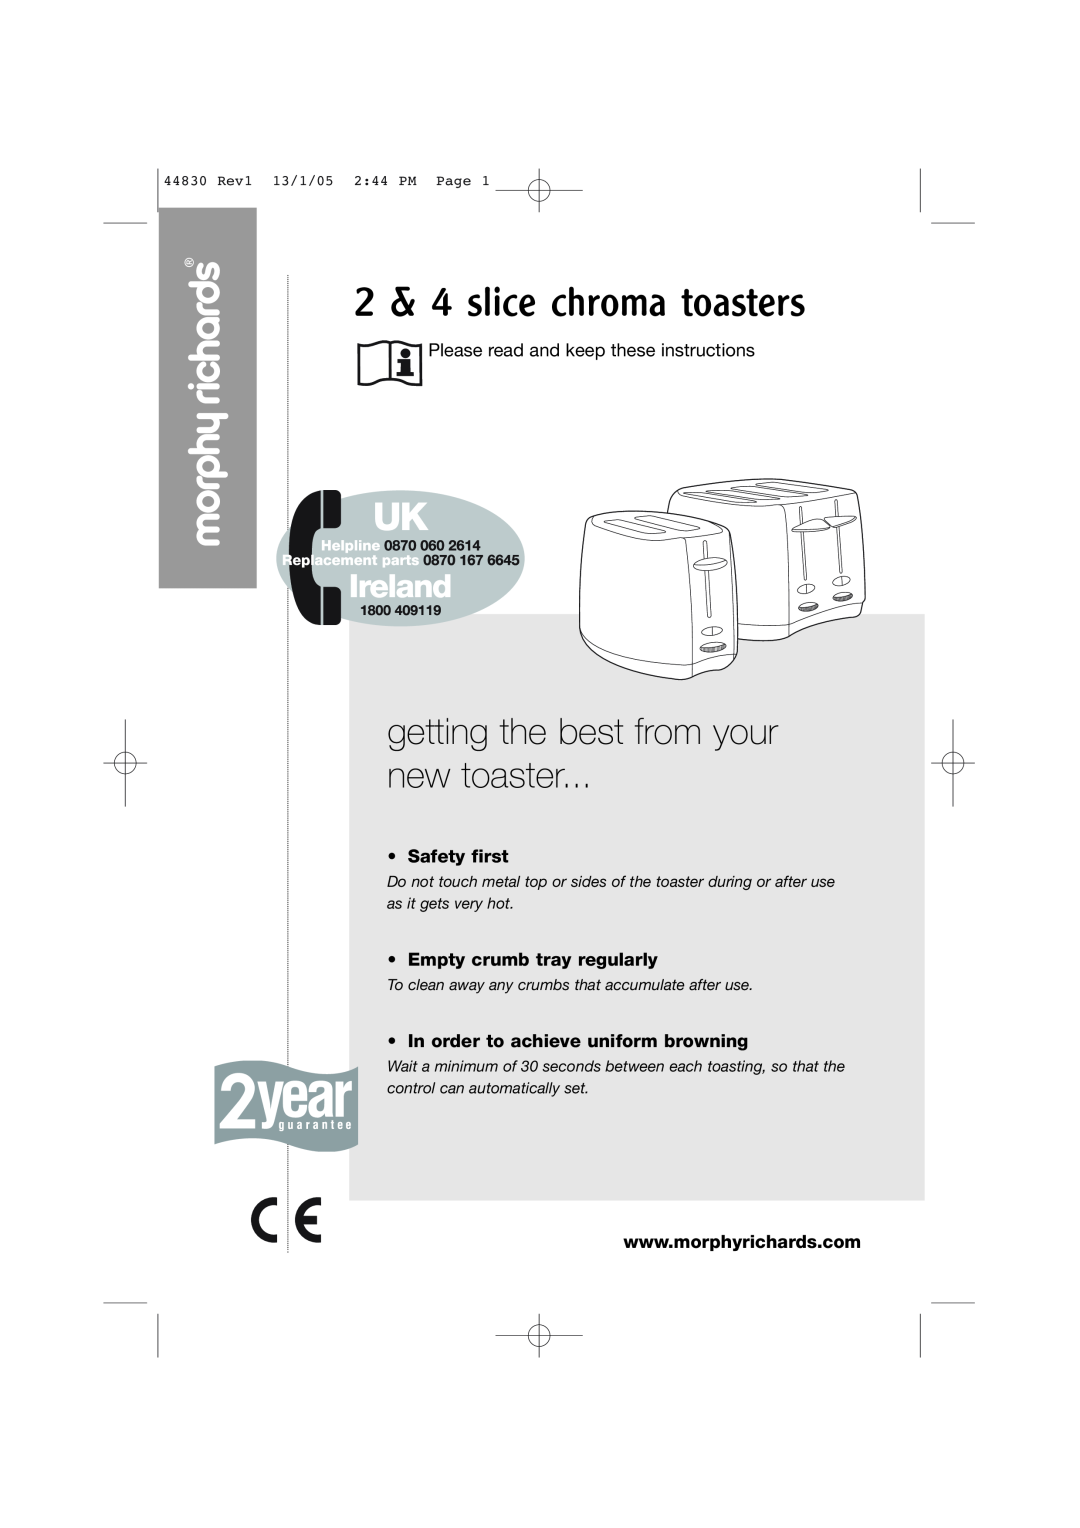 Morphy Richards 2 & 4 slice chroma toasters manual getting the best from your new toaster, Safety first 